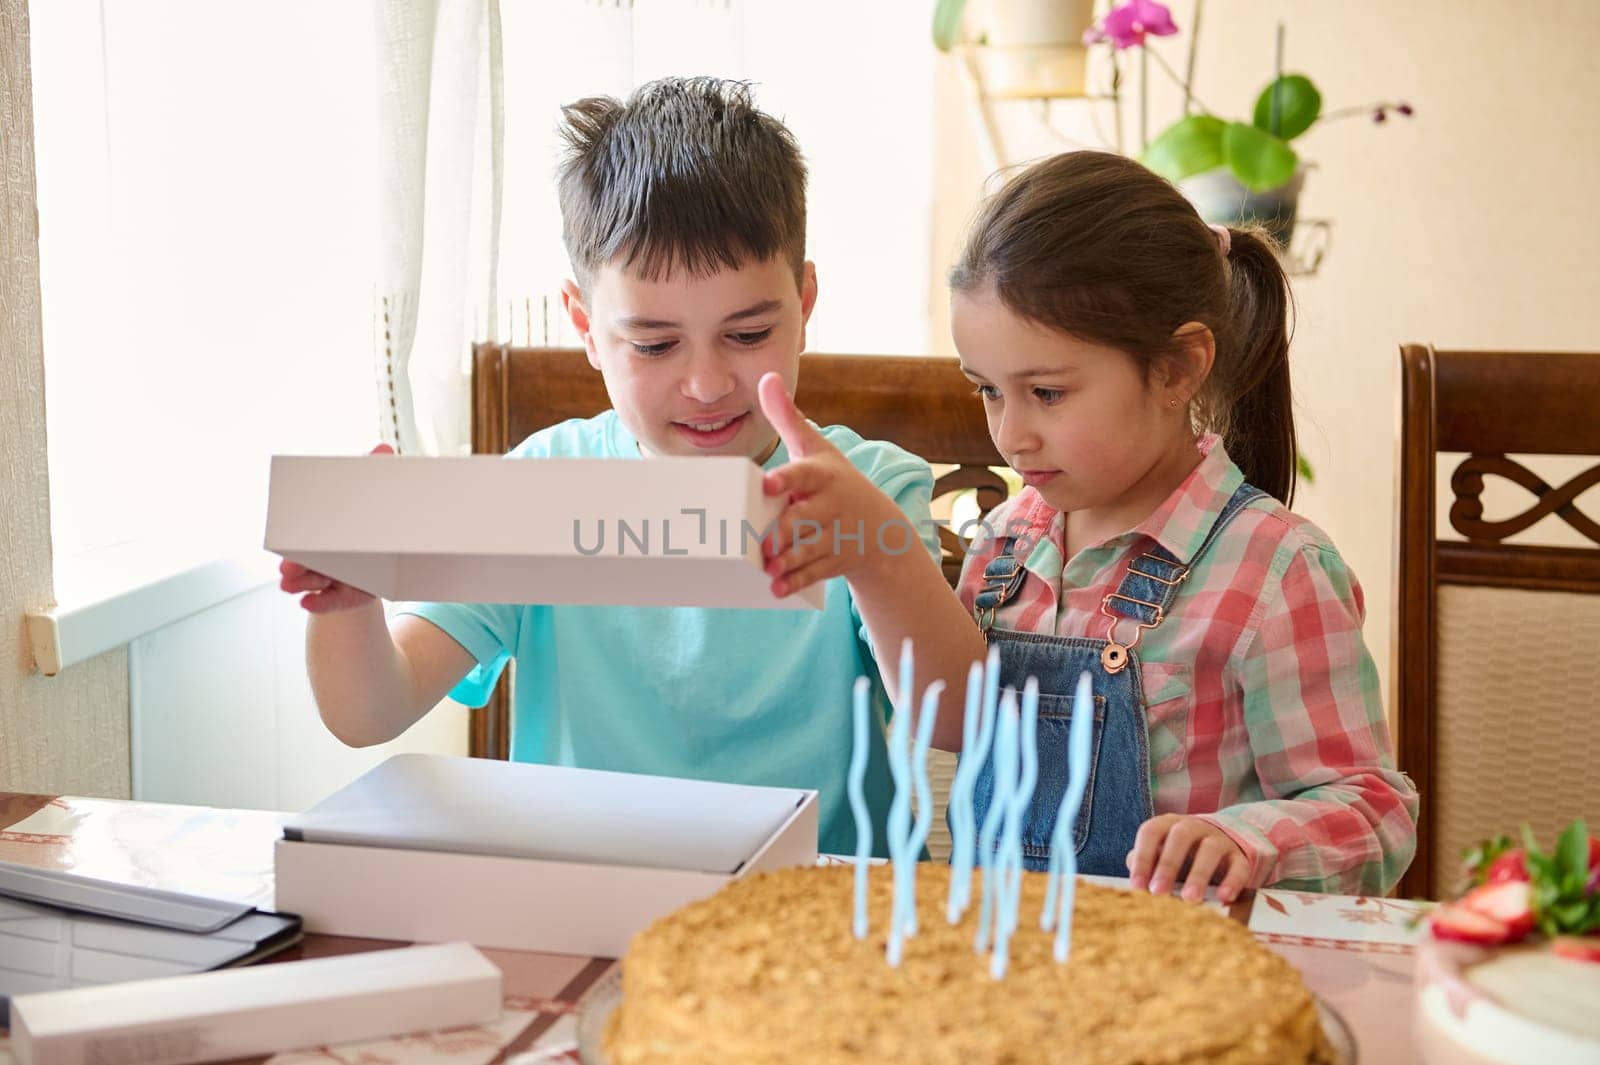 Little girl stands near her brother opening white blank mockup box with happy surprise inside it. Happy birthday concept by artgf